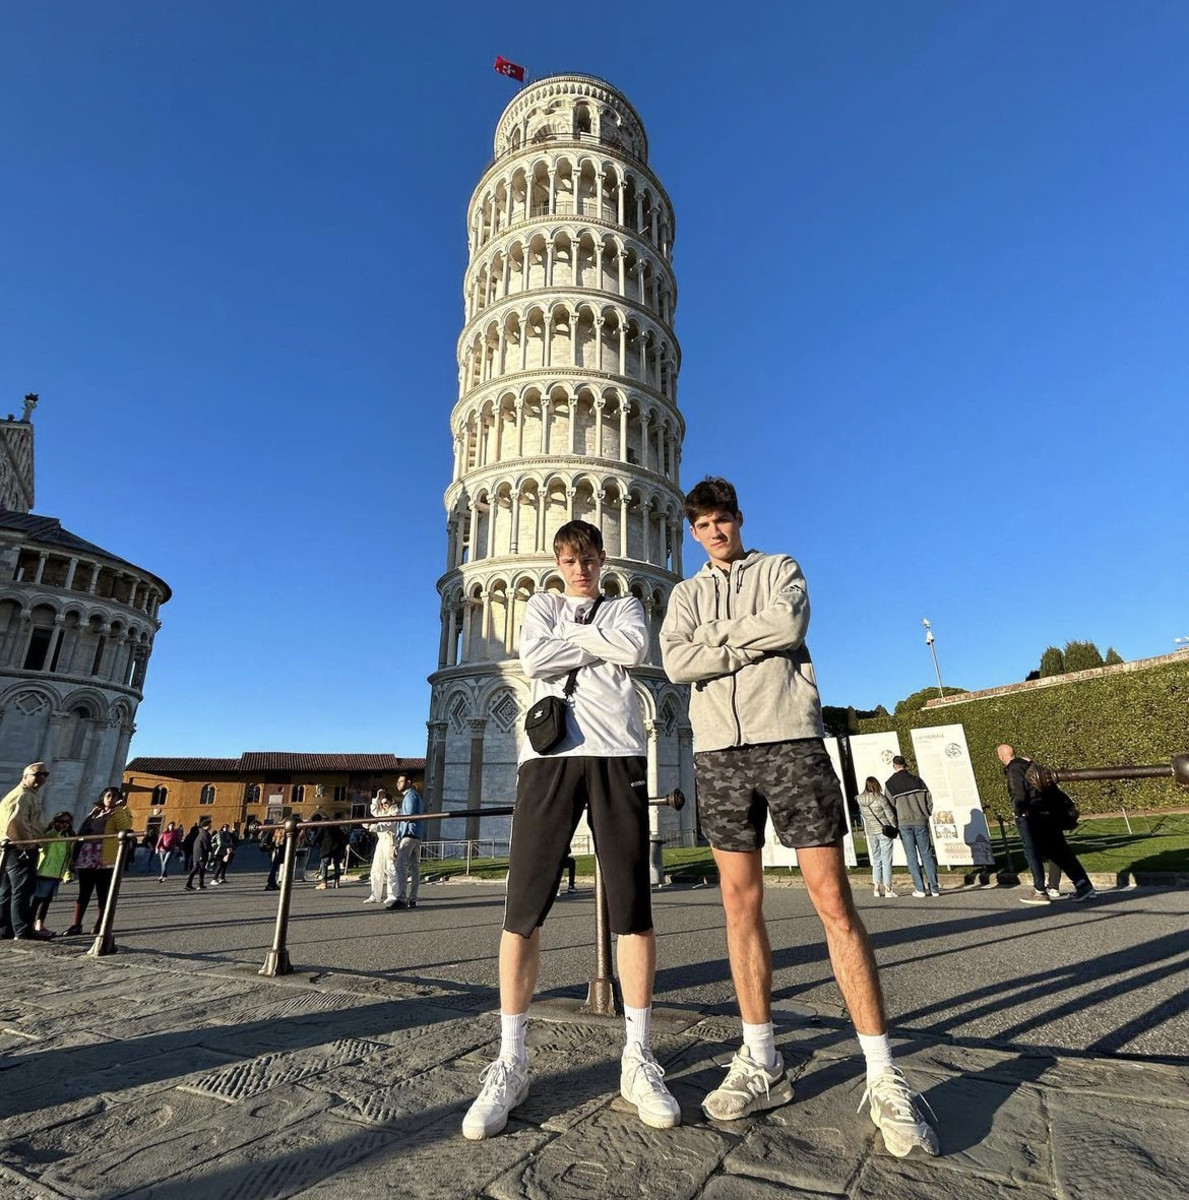 Gabe Cupps (left) and Reed Sheppard (right) stand in front of the Leaning Tower of Pisa during their trip to Italy with Team Ohio for the Junior International Tournament in Lissone, Italy.